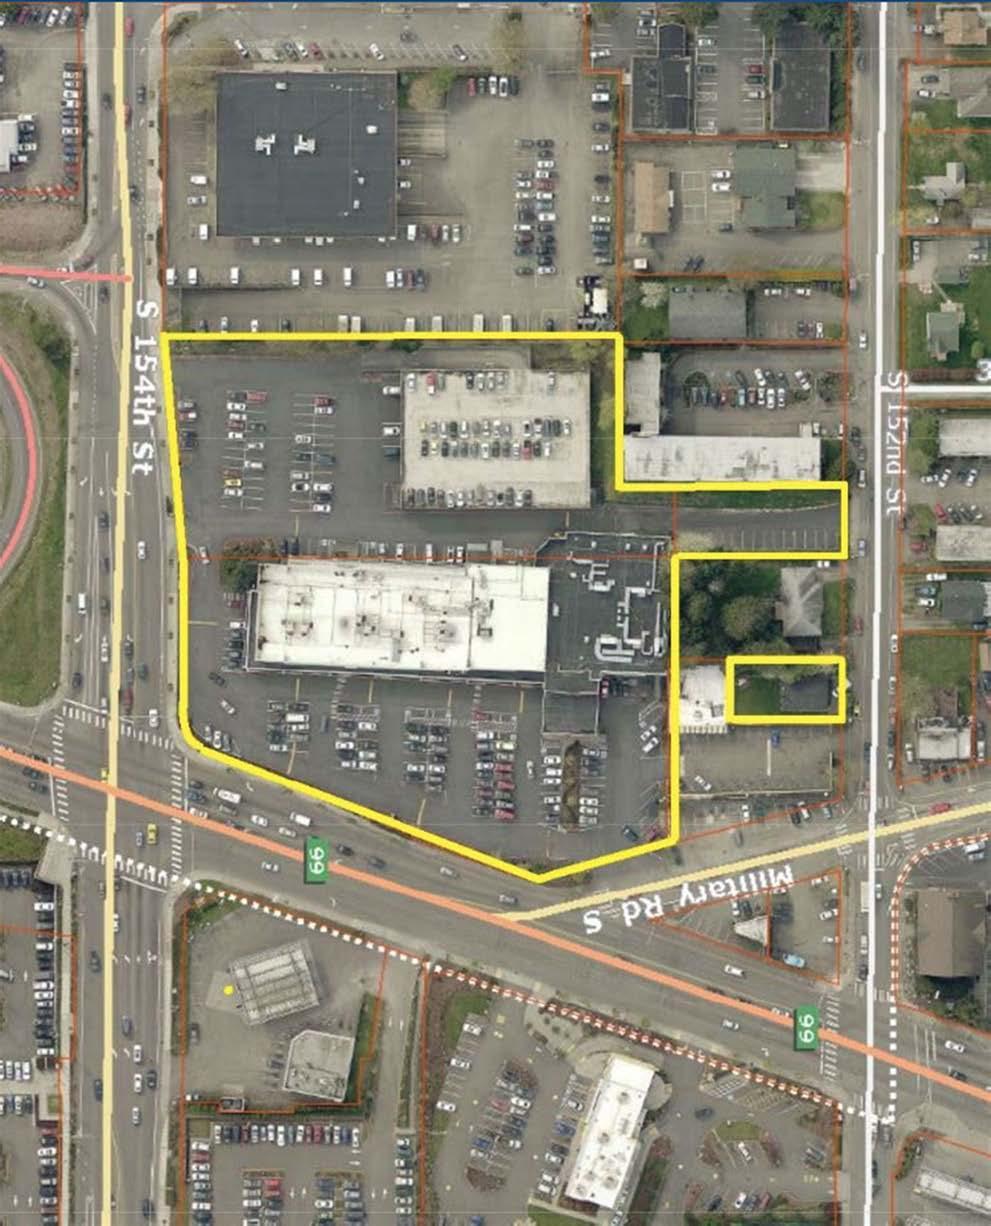 6. Project Sale of City owned SeaTac Center property South 152nd